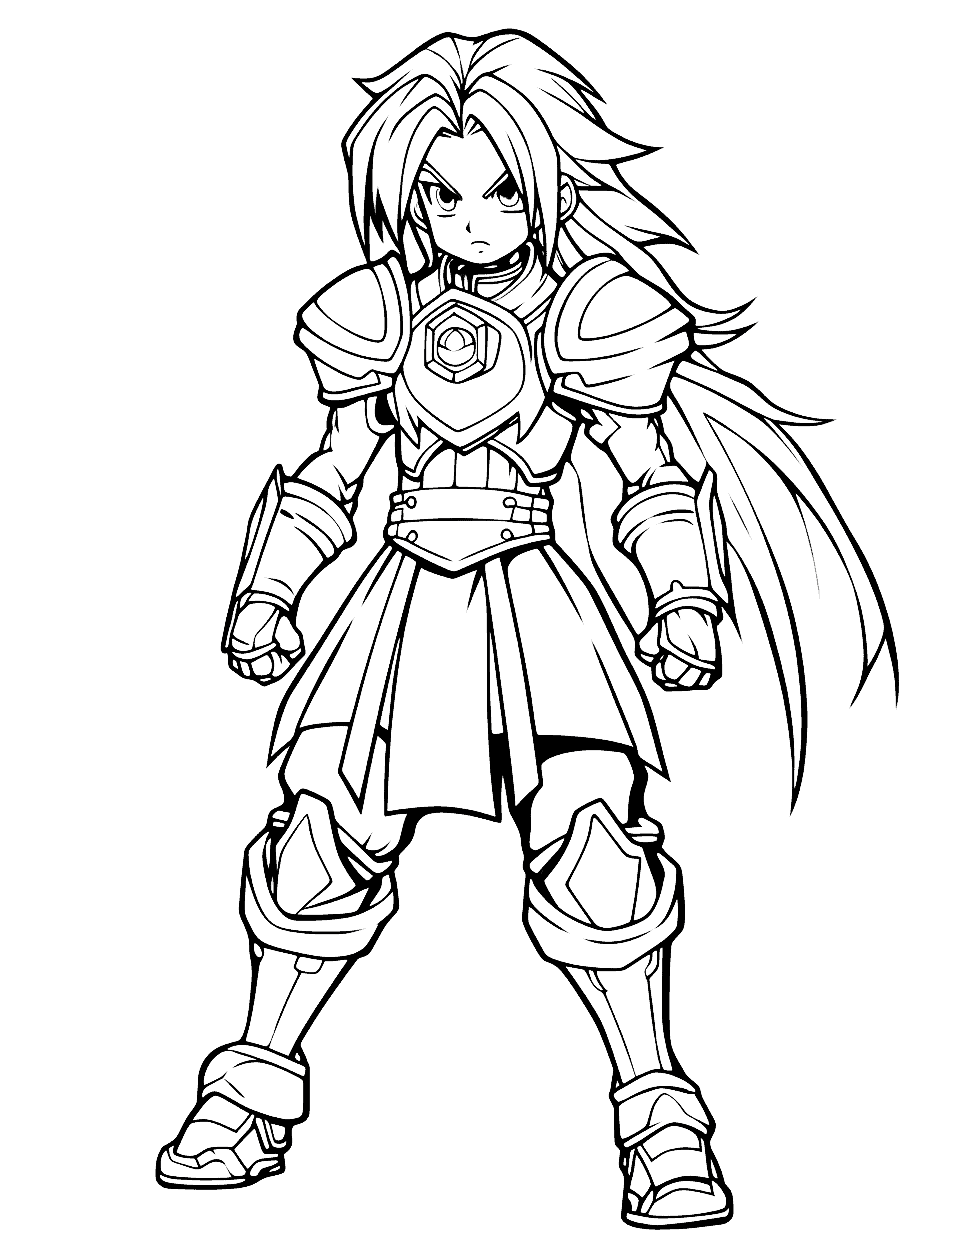 Cool Anime Warrior Coloring Page - A cool anime warrior charging into battle, with an epic armor design.